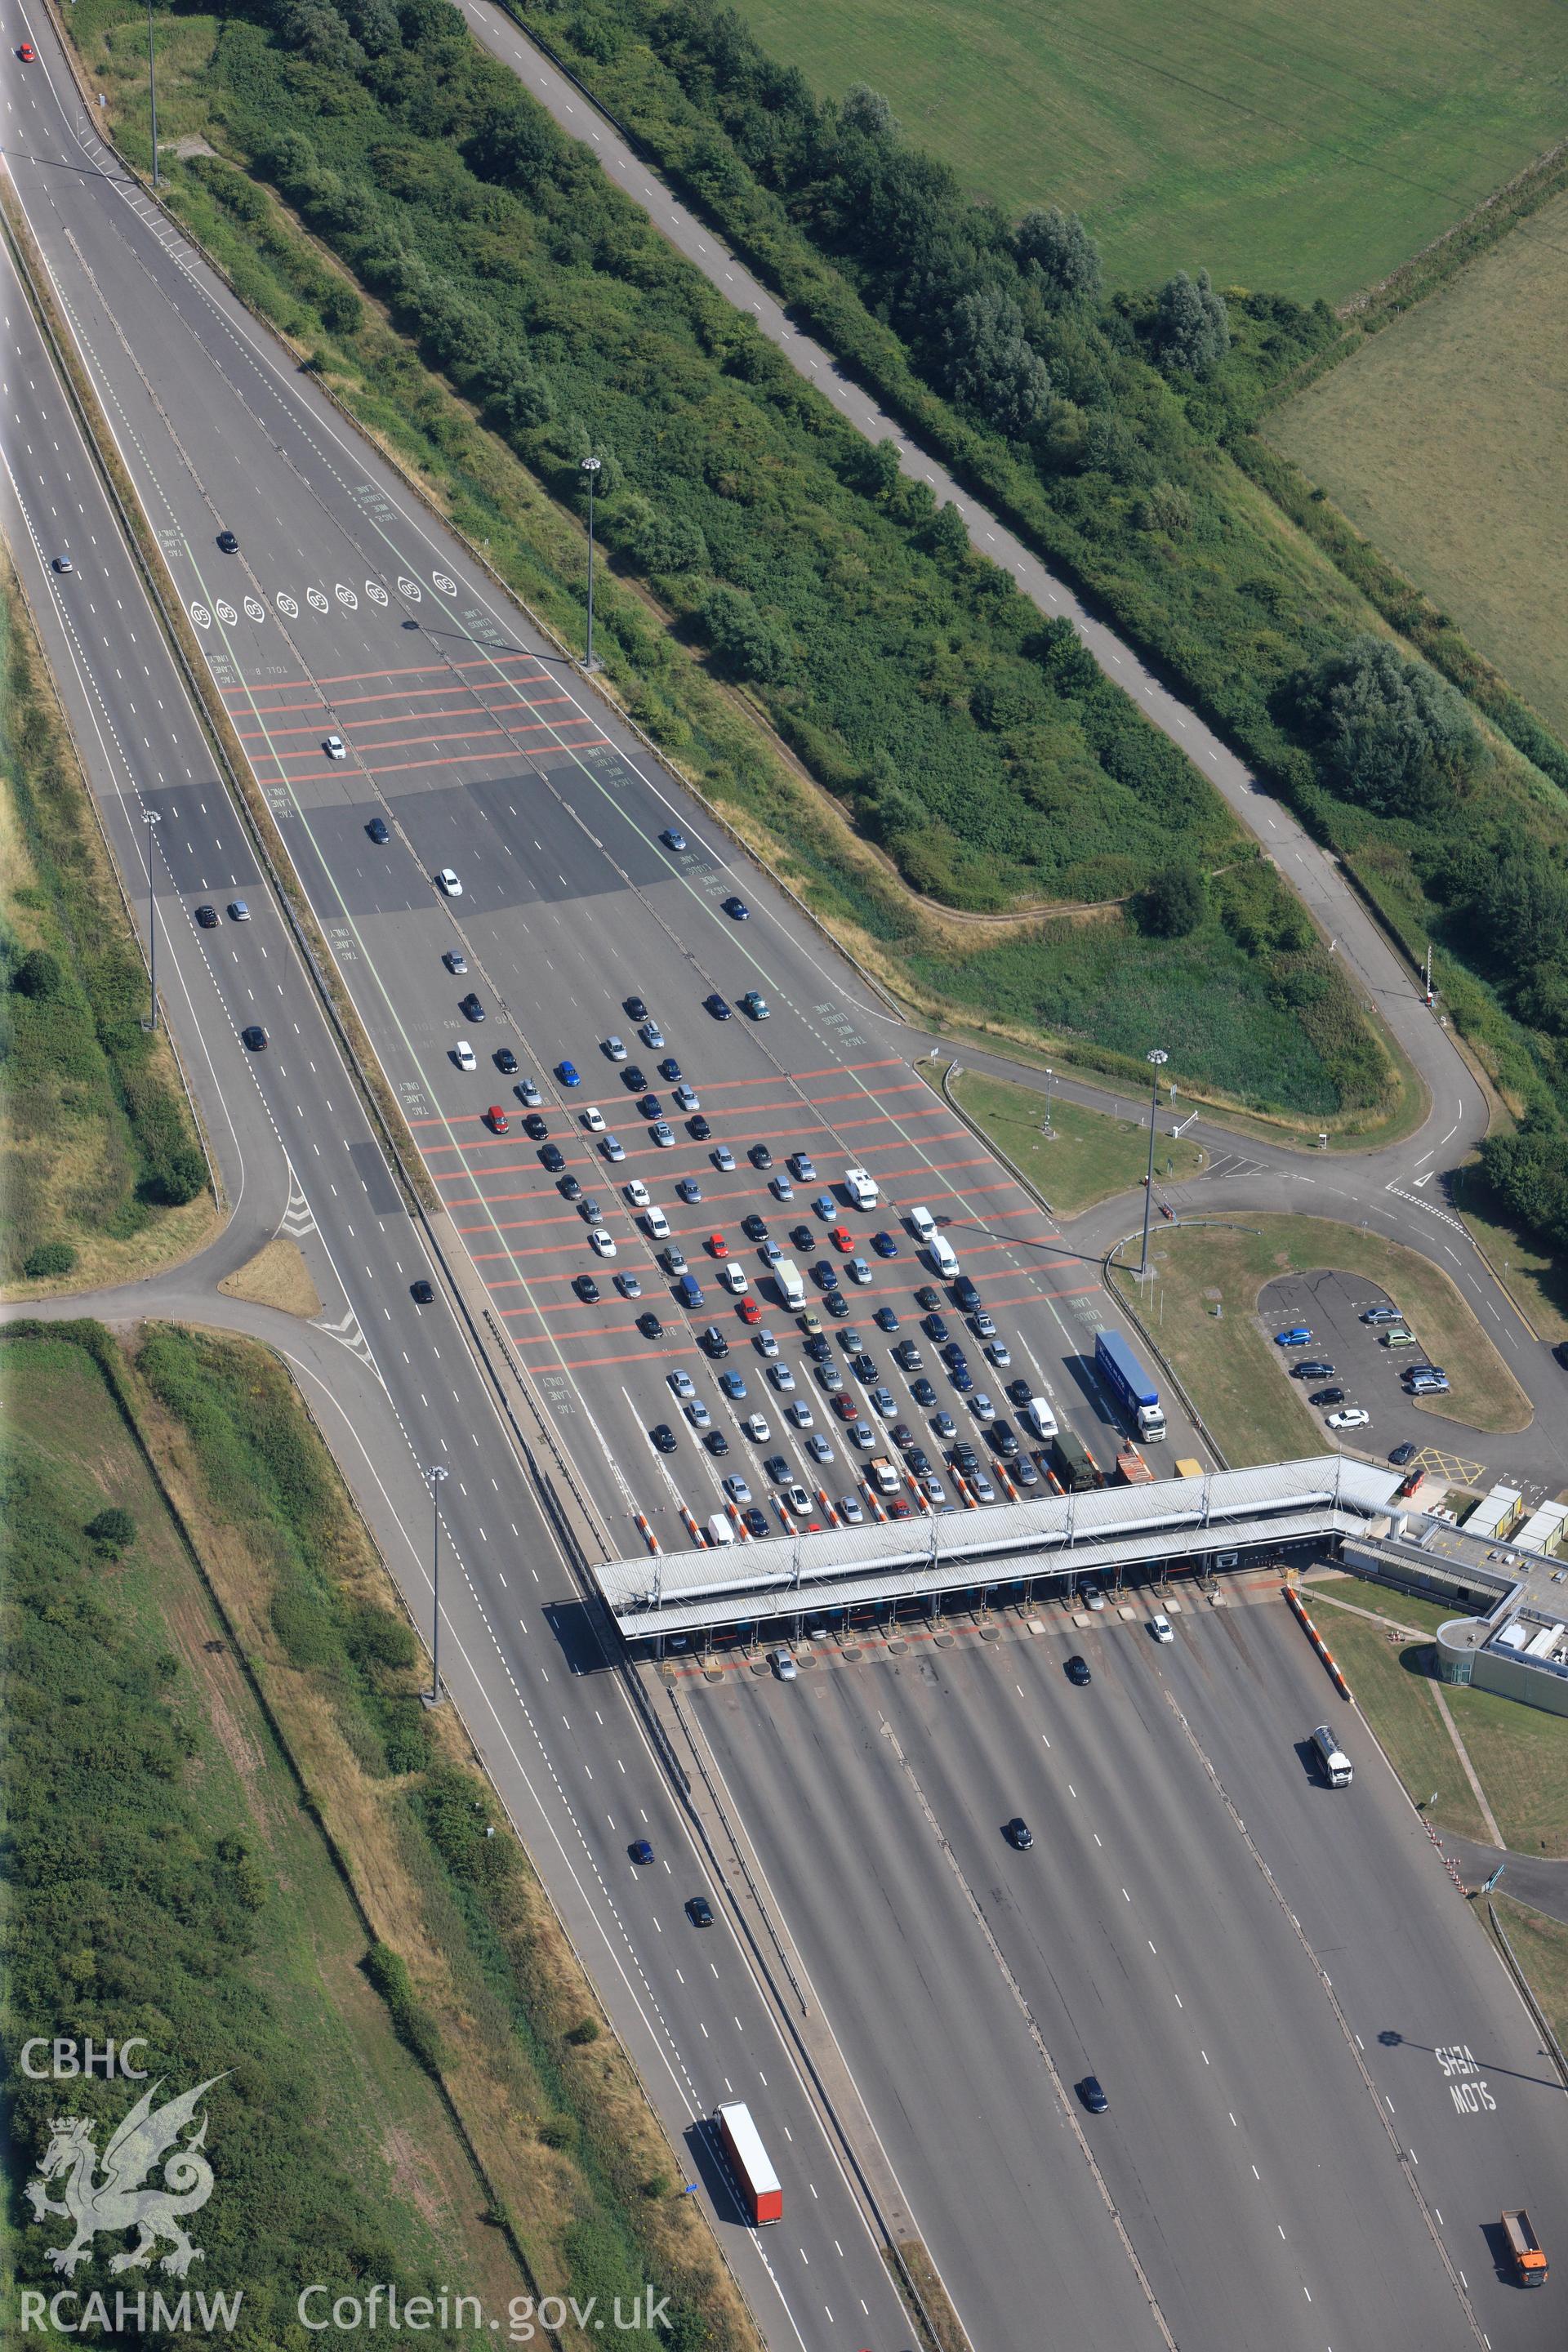 Toll booth on the M4 motorway, just before passing southern edge of Caldicot on its way to the second Severn Crossing. Oblique aerial photograph taken during RCAHMW?s programme of archaeological aerial reconnaissance by Toby Driver, 01/08/2013.